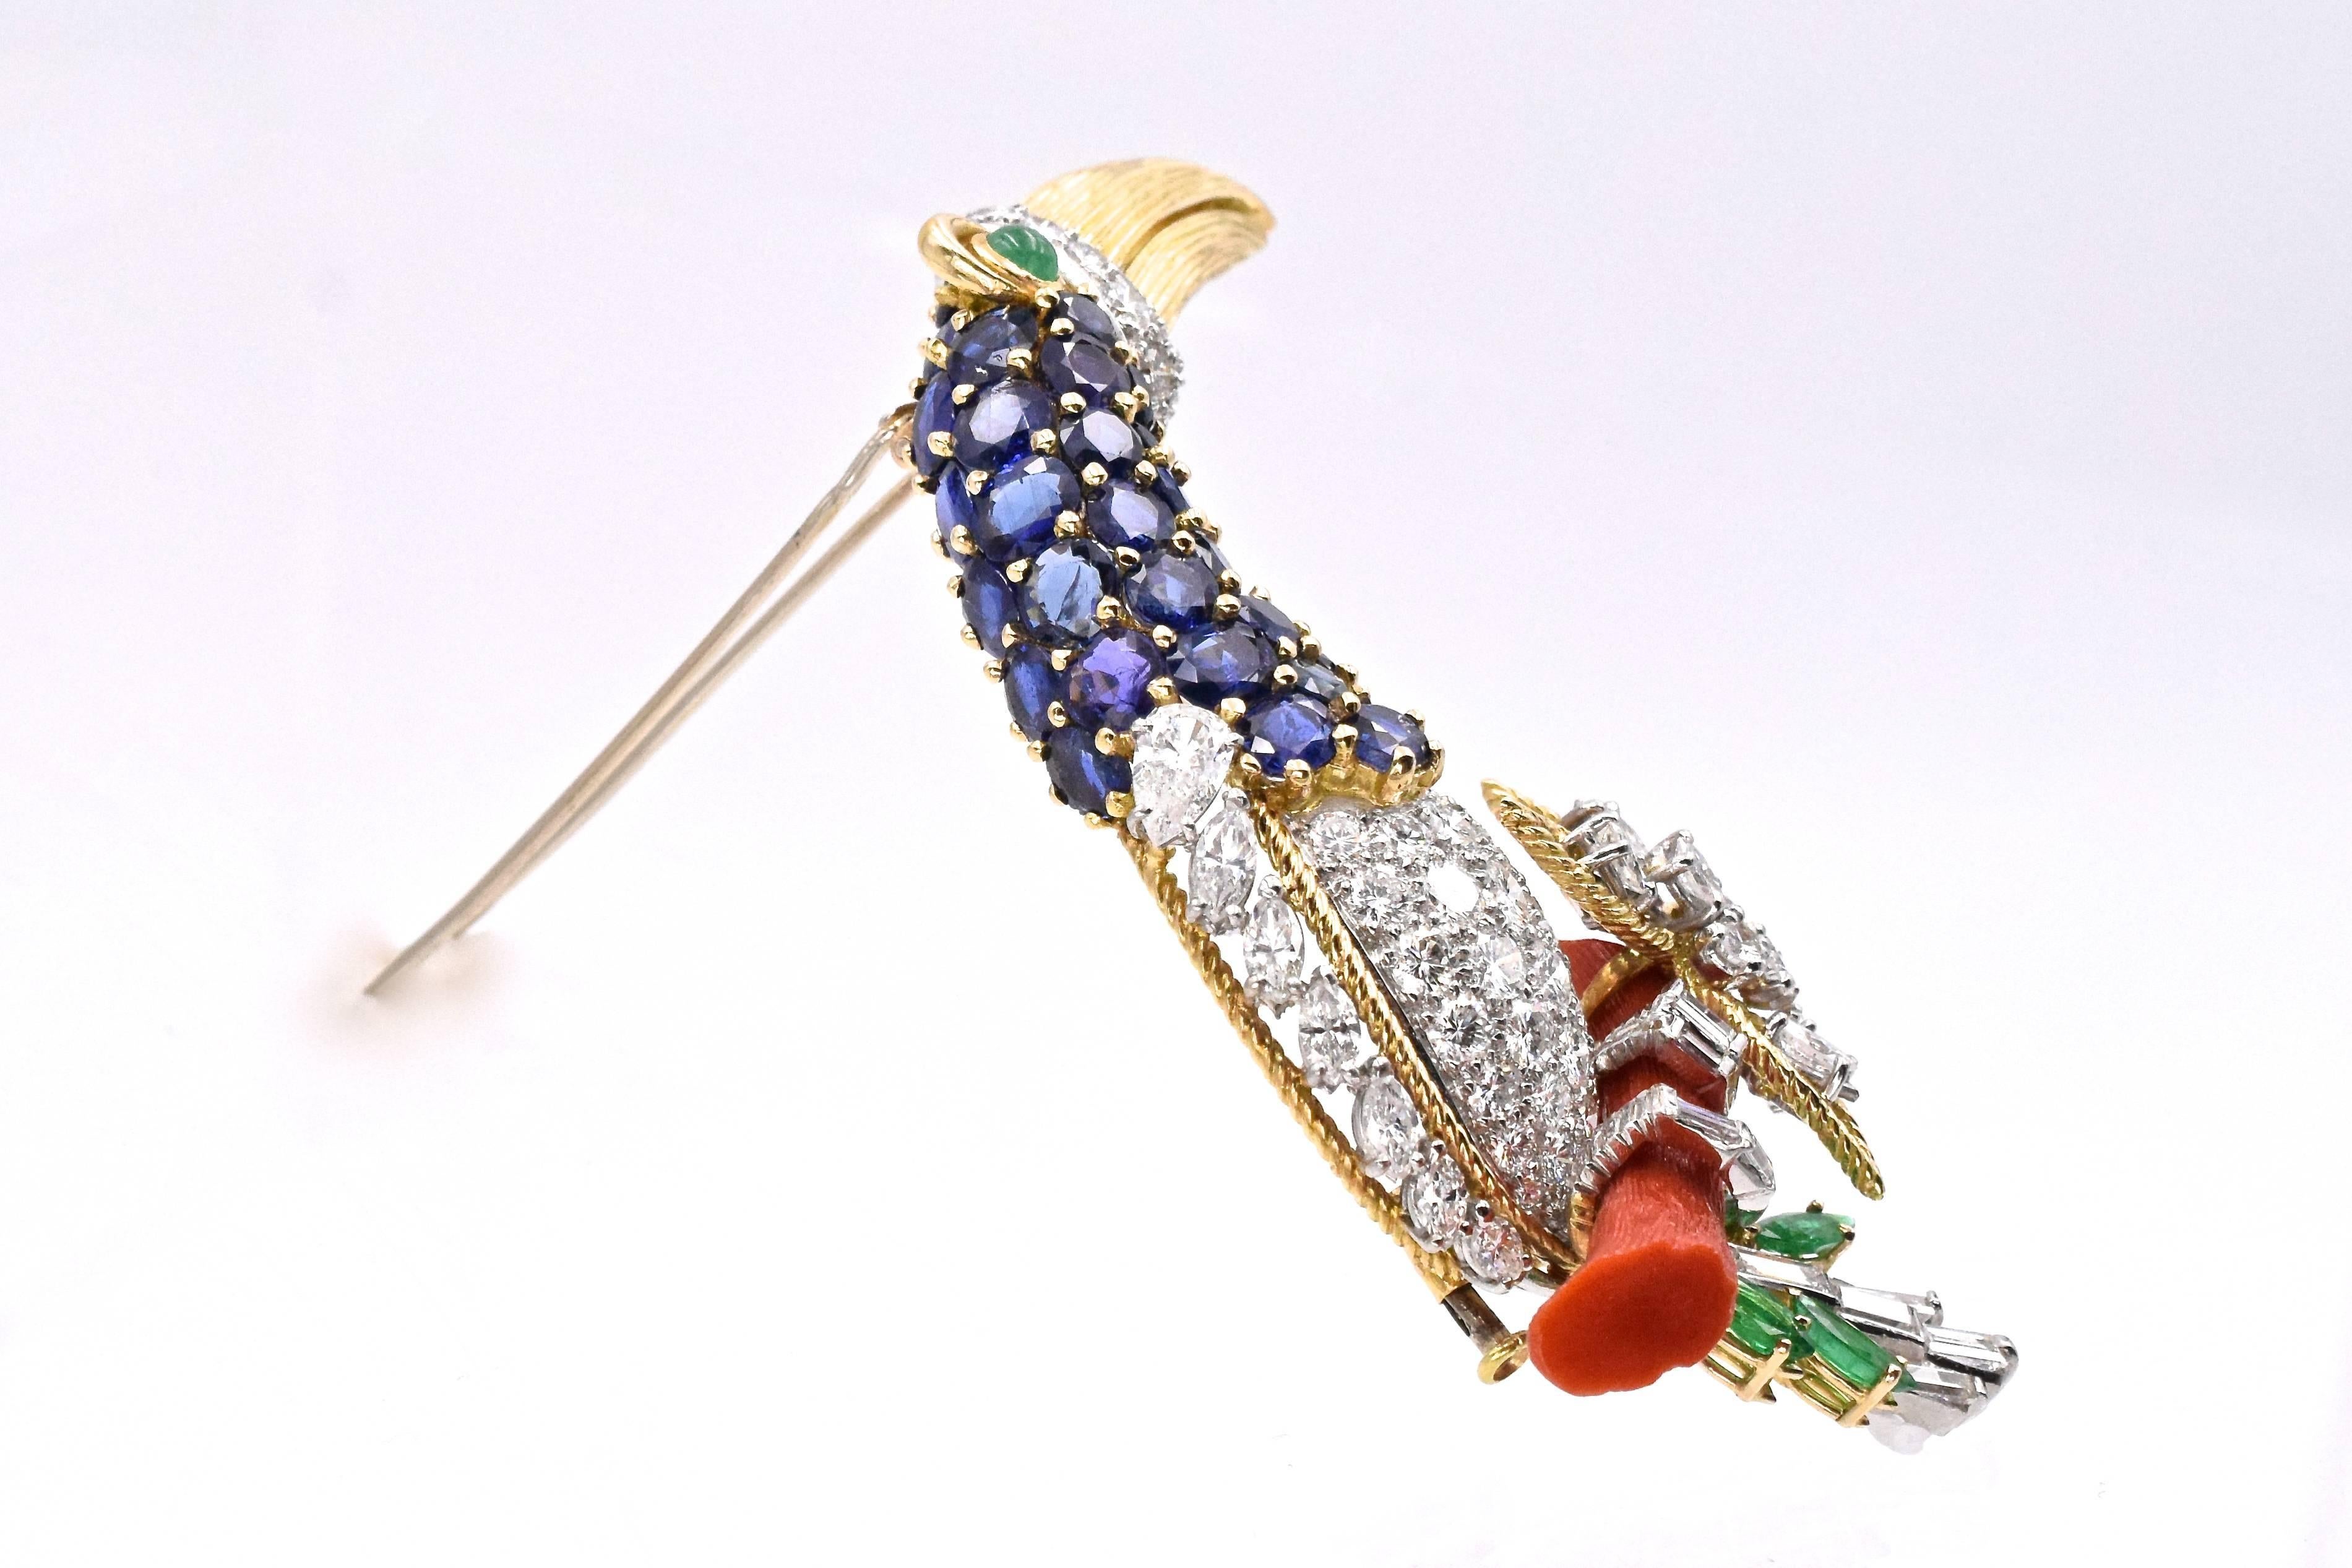  Branch Coral, Diamond and Gem-Set Toucan Clip-Brooch,  
 the stylized toucan perched atop a branch coral, with breast, wing, claws, tail and beak set with round, pear and marquise-shaped and baguette diamonds approximately 7.5ct., the neck is set